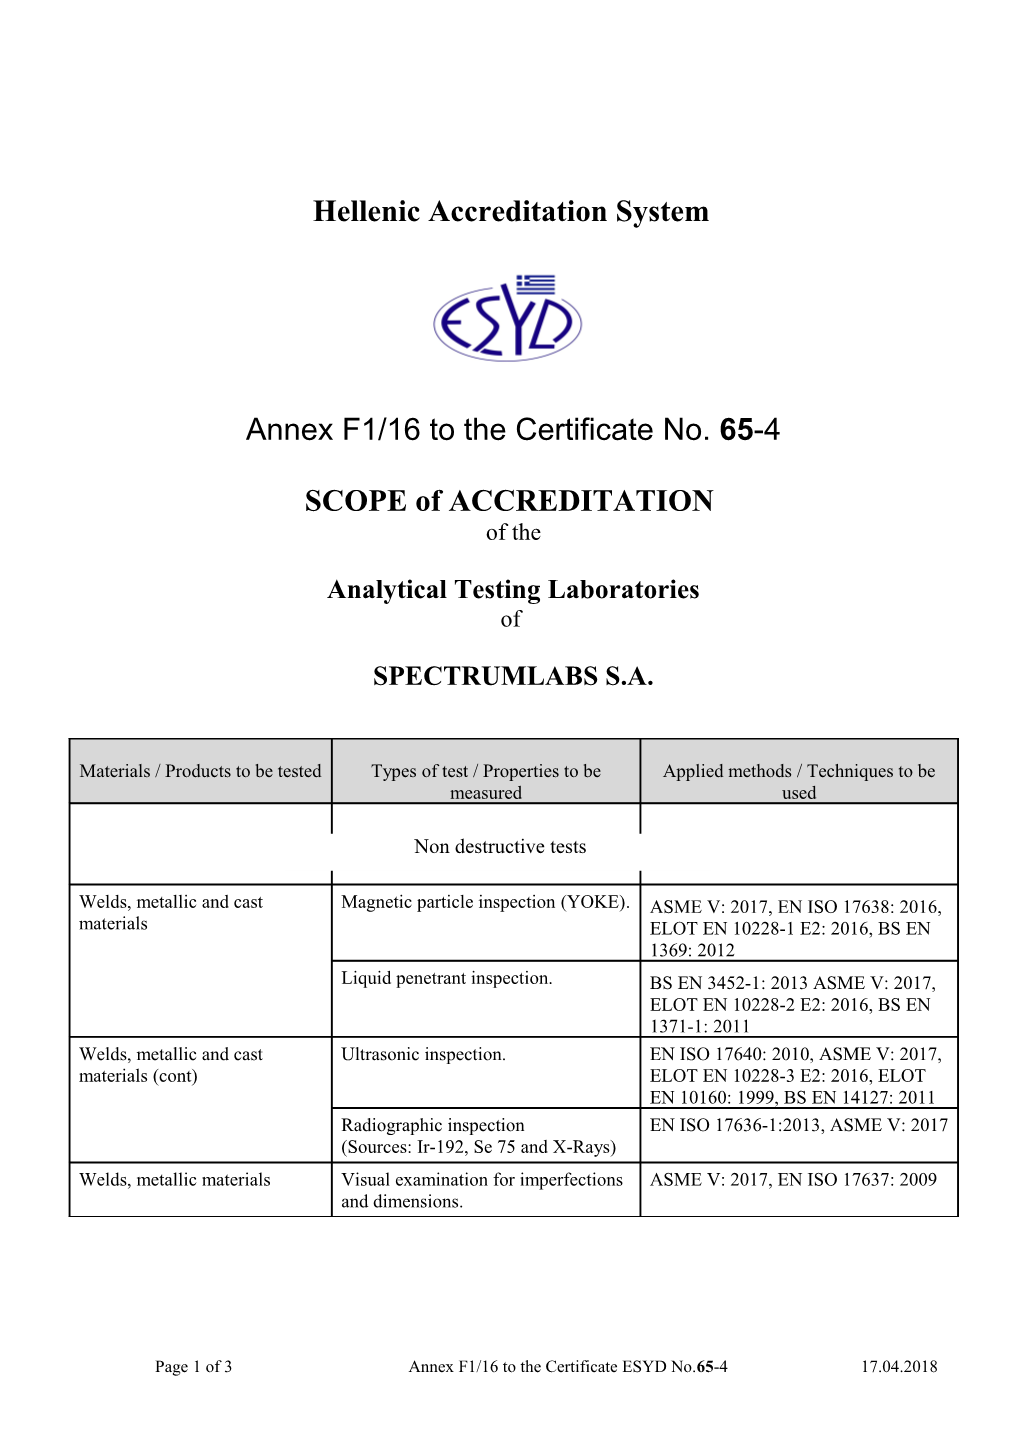 Hellenic Accreditation System S